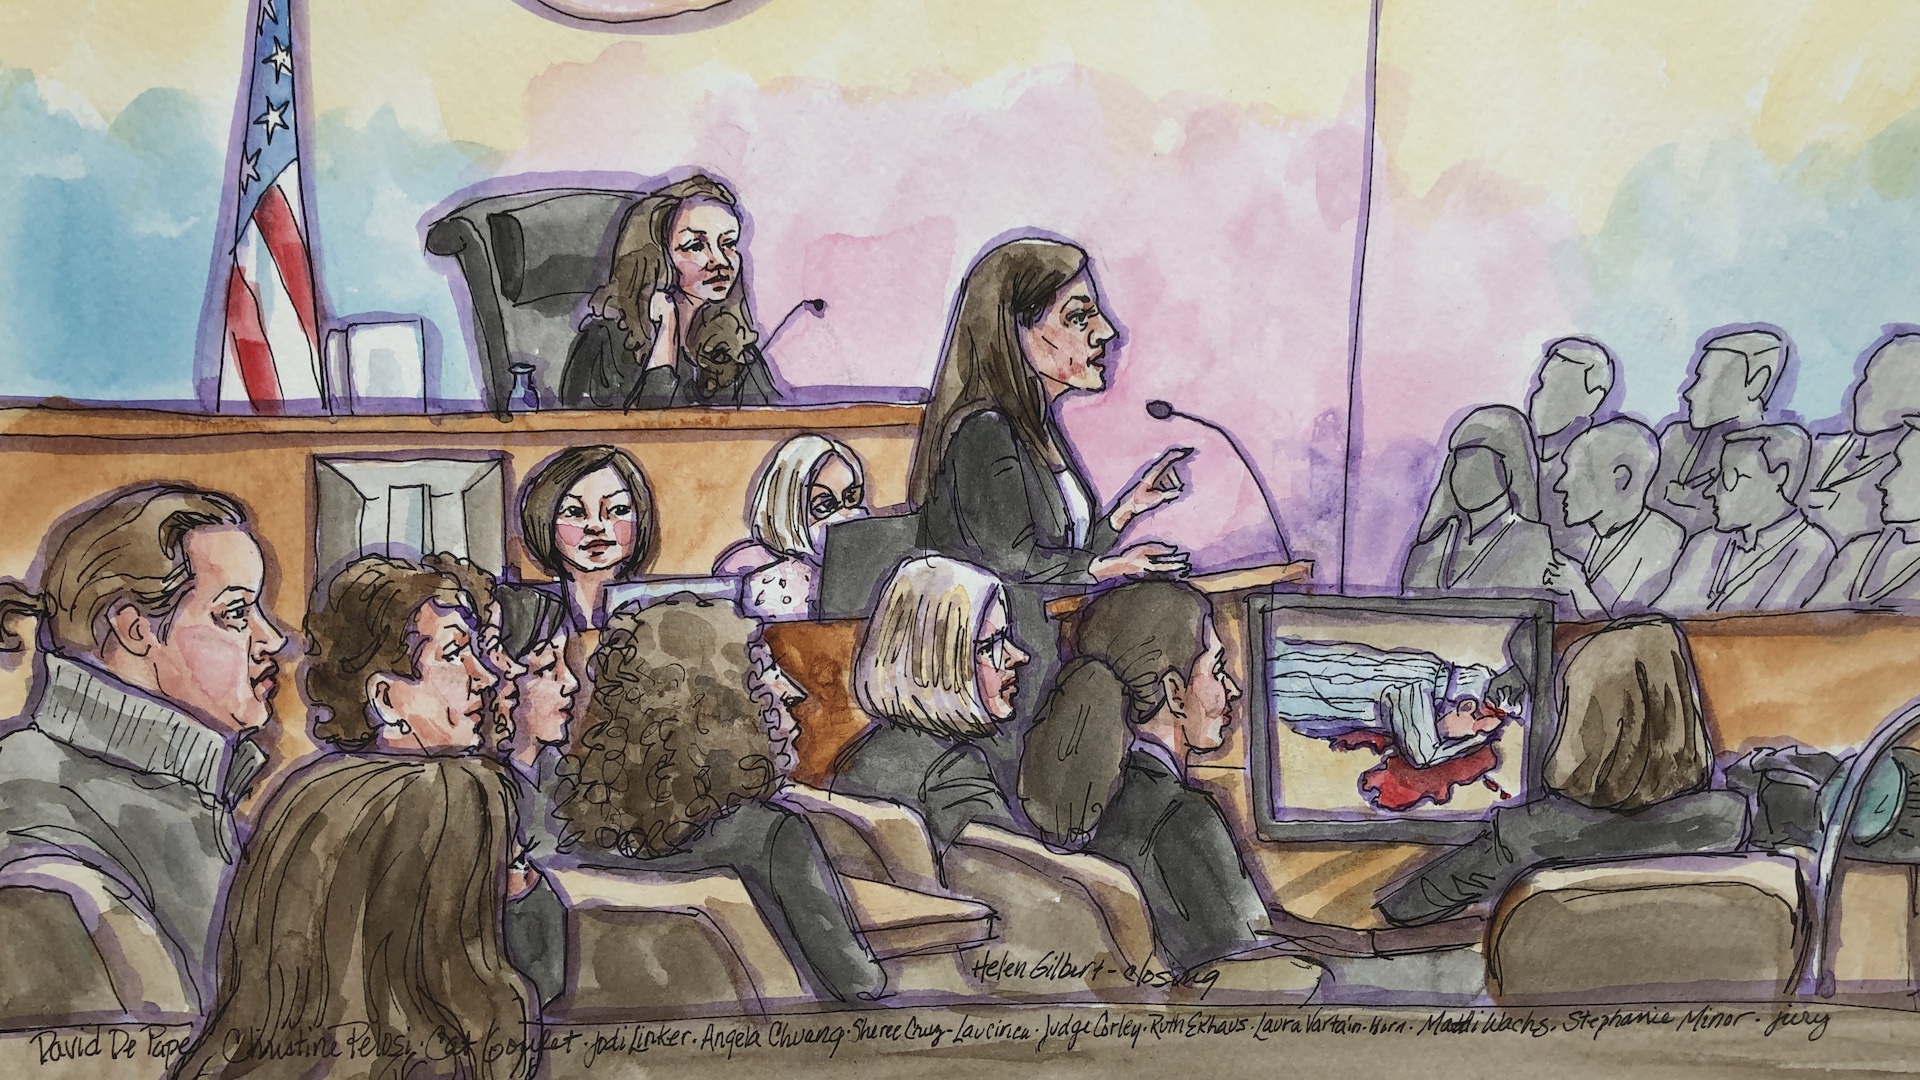 A watercolor sketch of a woman standing at a lectern in a courtroom, speaking to a faceless jury, with a judge observing.